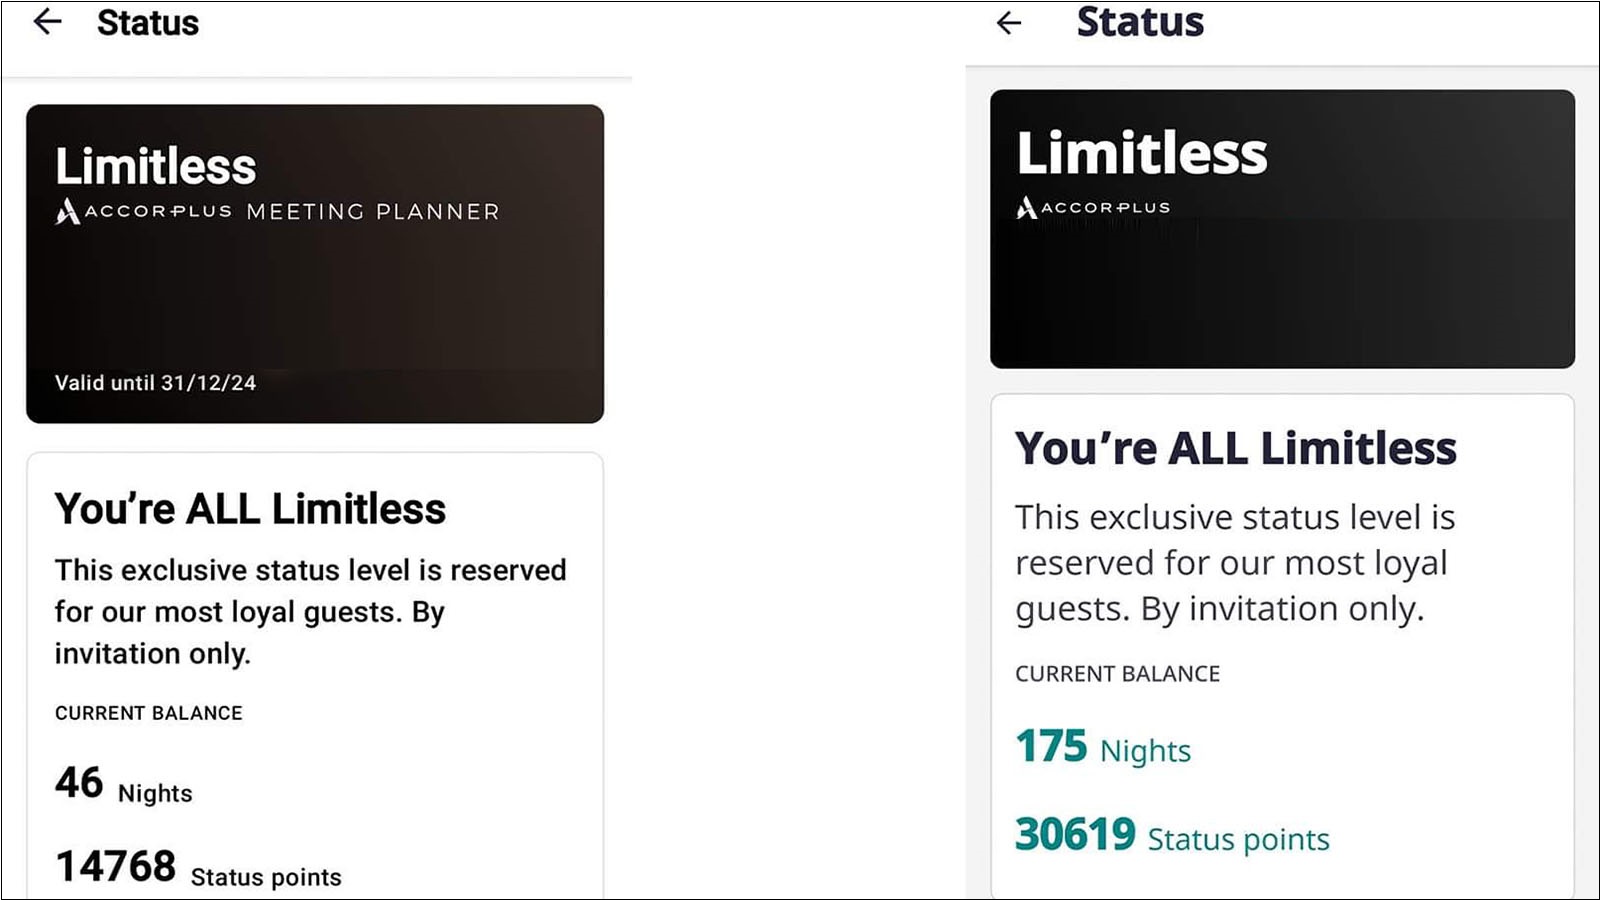 Limitless tier members of Accor Live Limitless